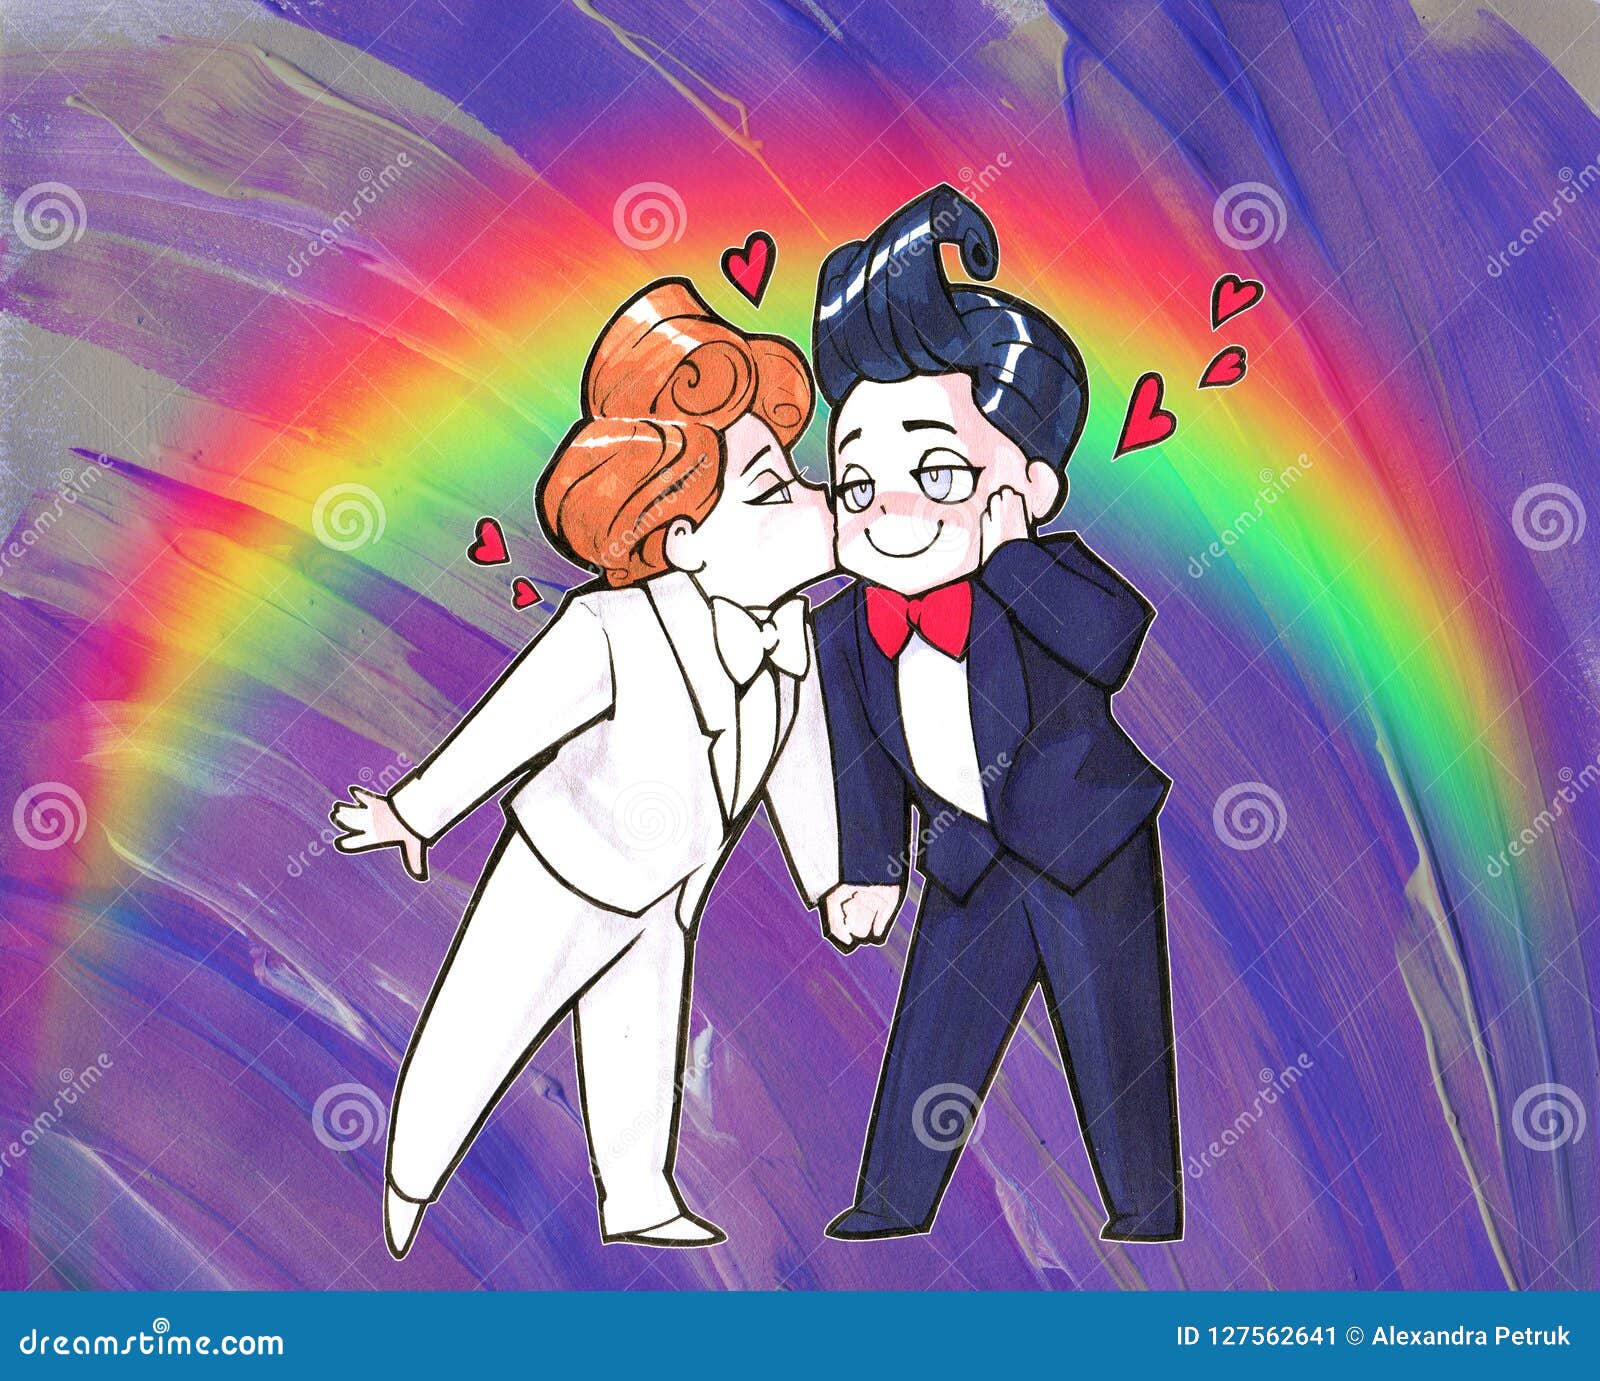 Cartoon Anime Illustration Two Happy Handsome Men Just Married Homosexual Couple Stock Illustration Illustration Of Character Design 127562641 See more ideas about handsome anime, anime, anime boy. dreamstime com